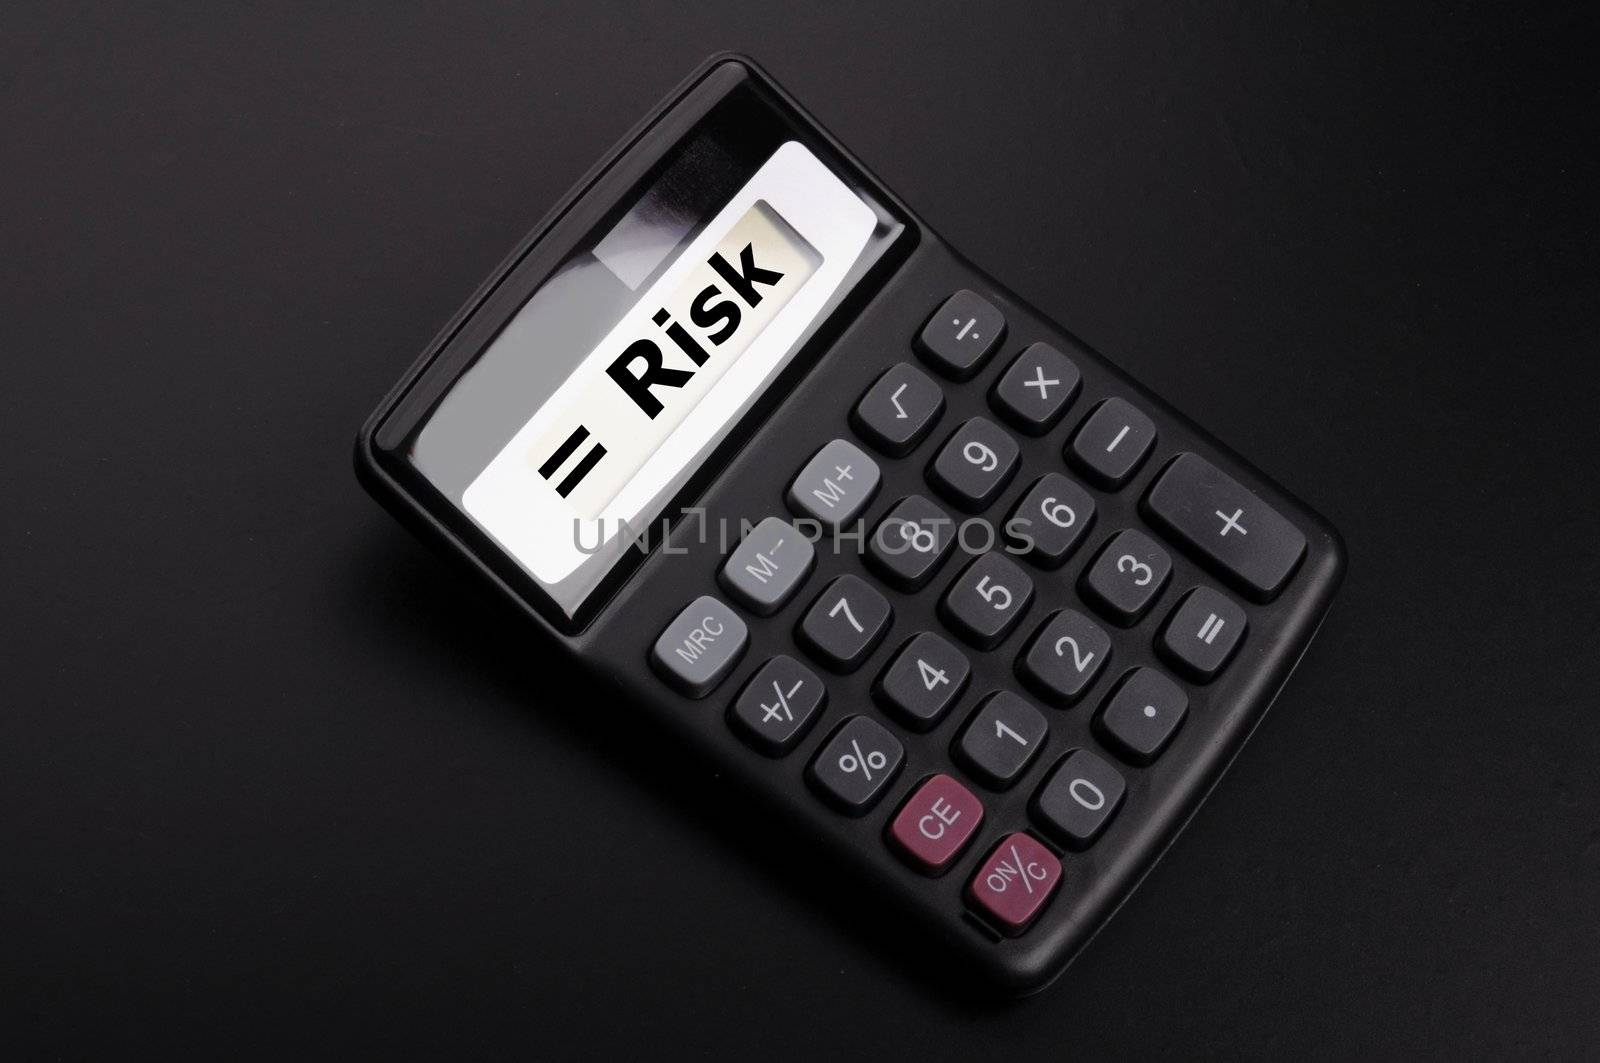 risk management concept with calculator showing financial success